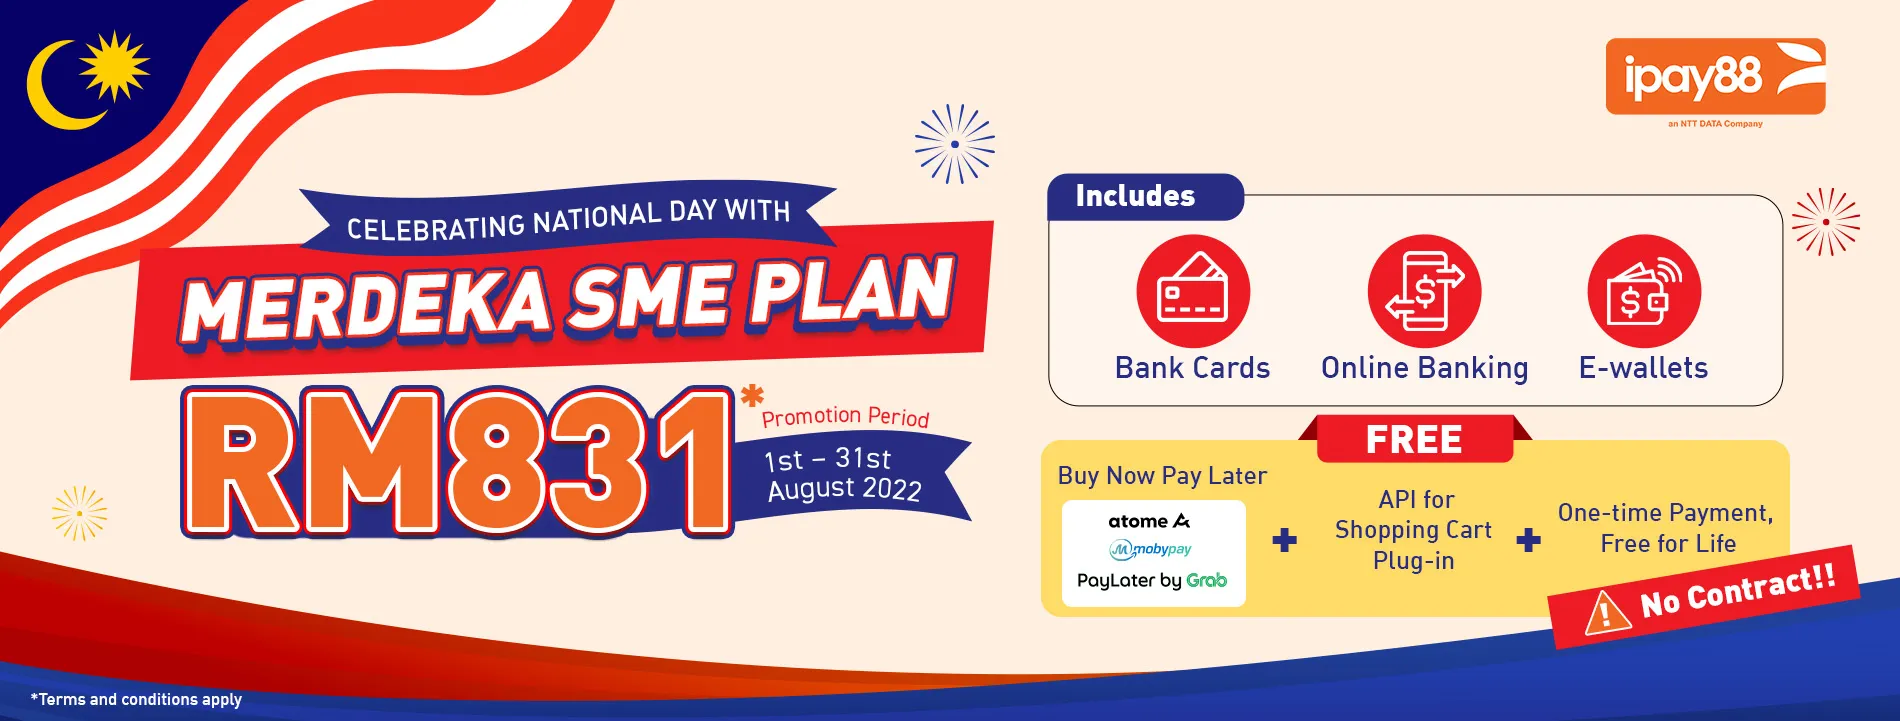 Merdeka Day Offers Deals Promotions Sale SME Plan Payment Gateway Malaysia Promo - iPay88